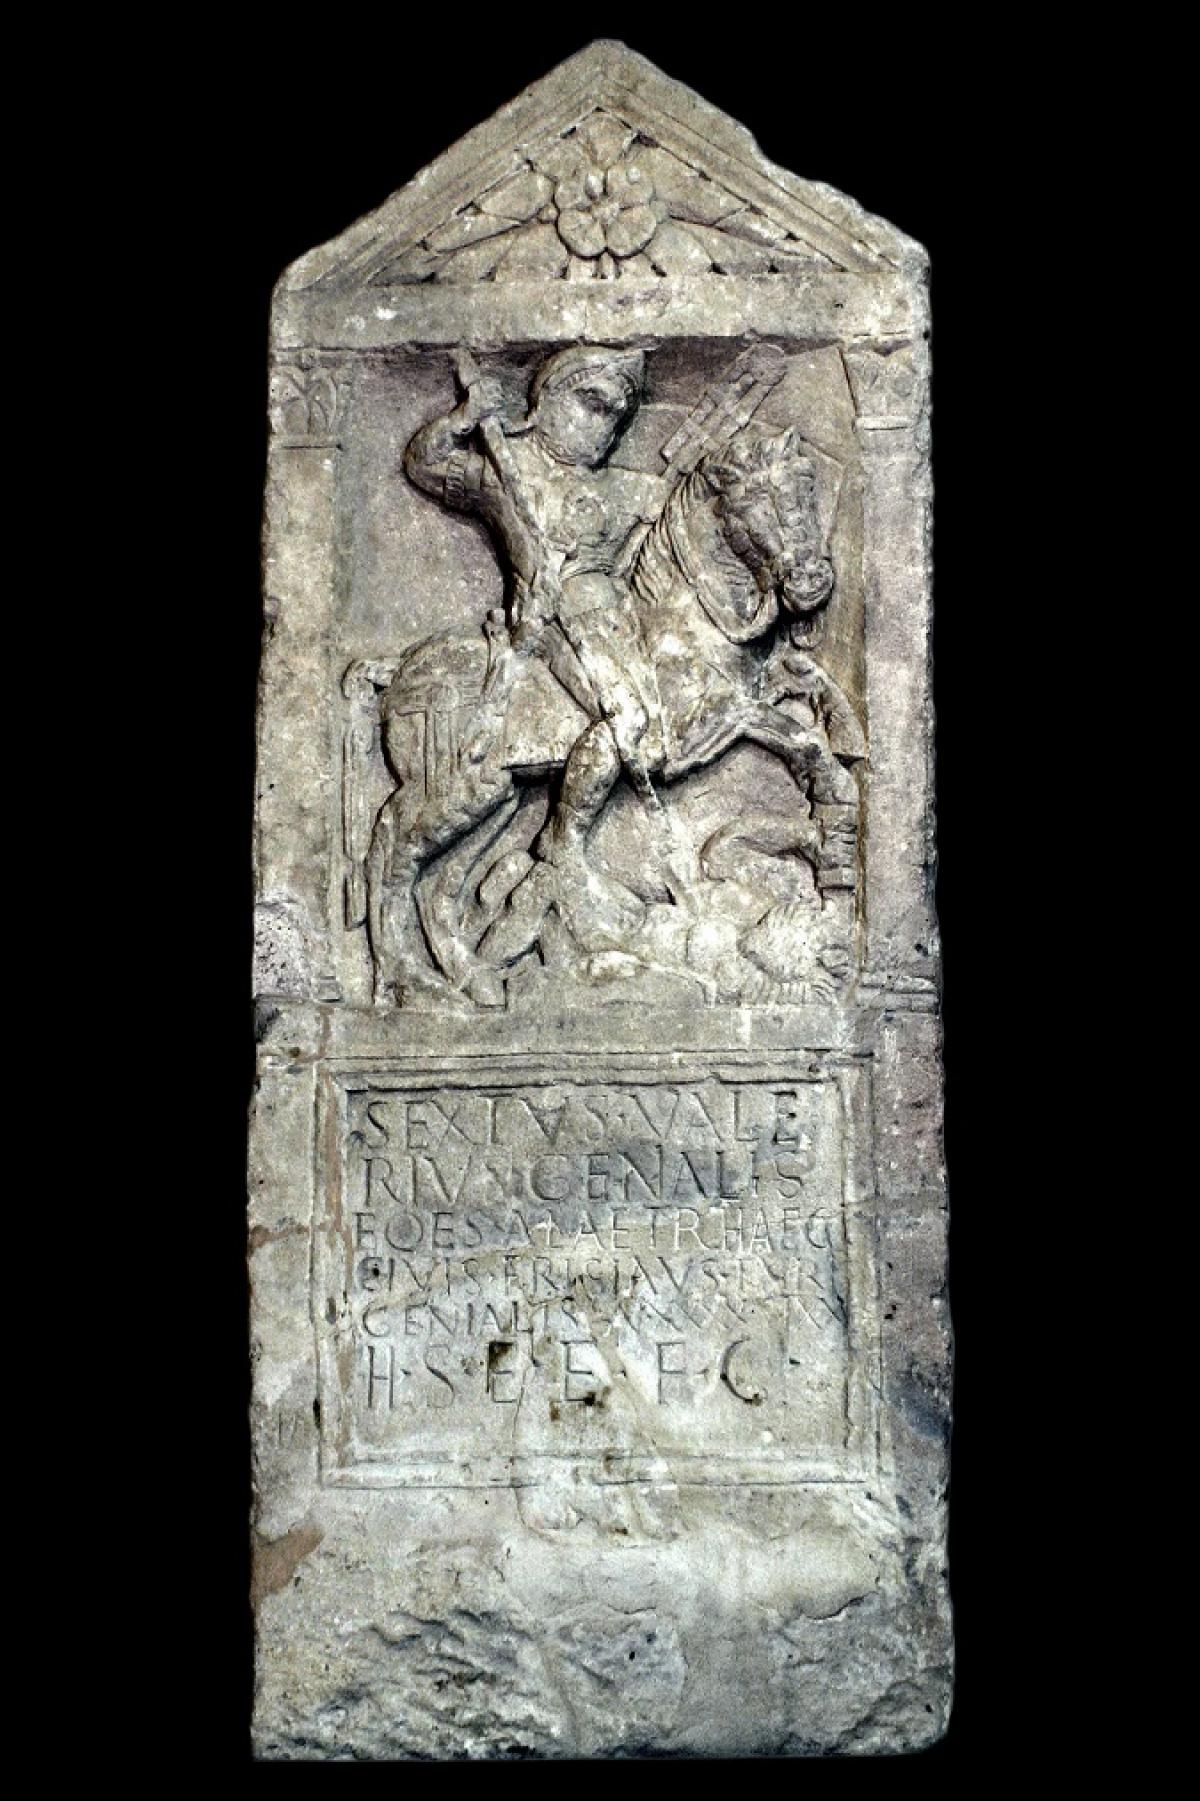 OK, Grove, Headstone Symbols and Meanings, Horse with Soldier Riding in Battle